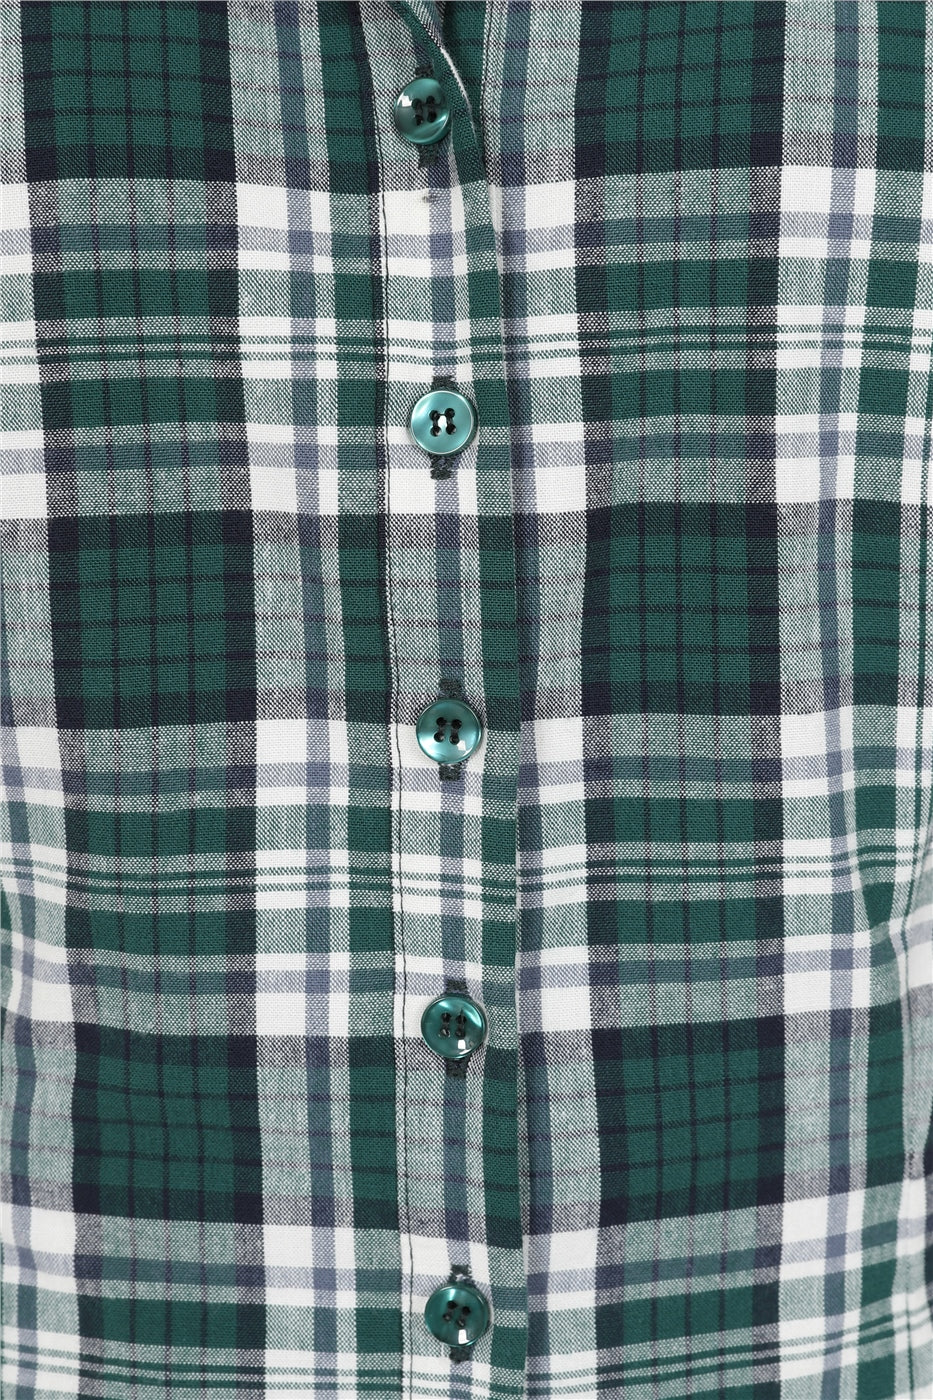 Caterina Emerald Check Shirt by Collectif